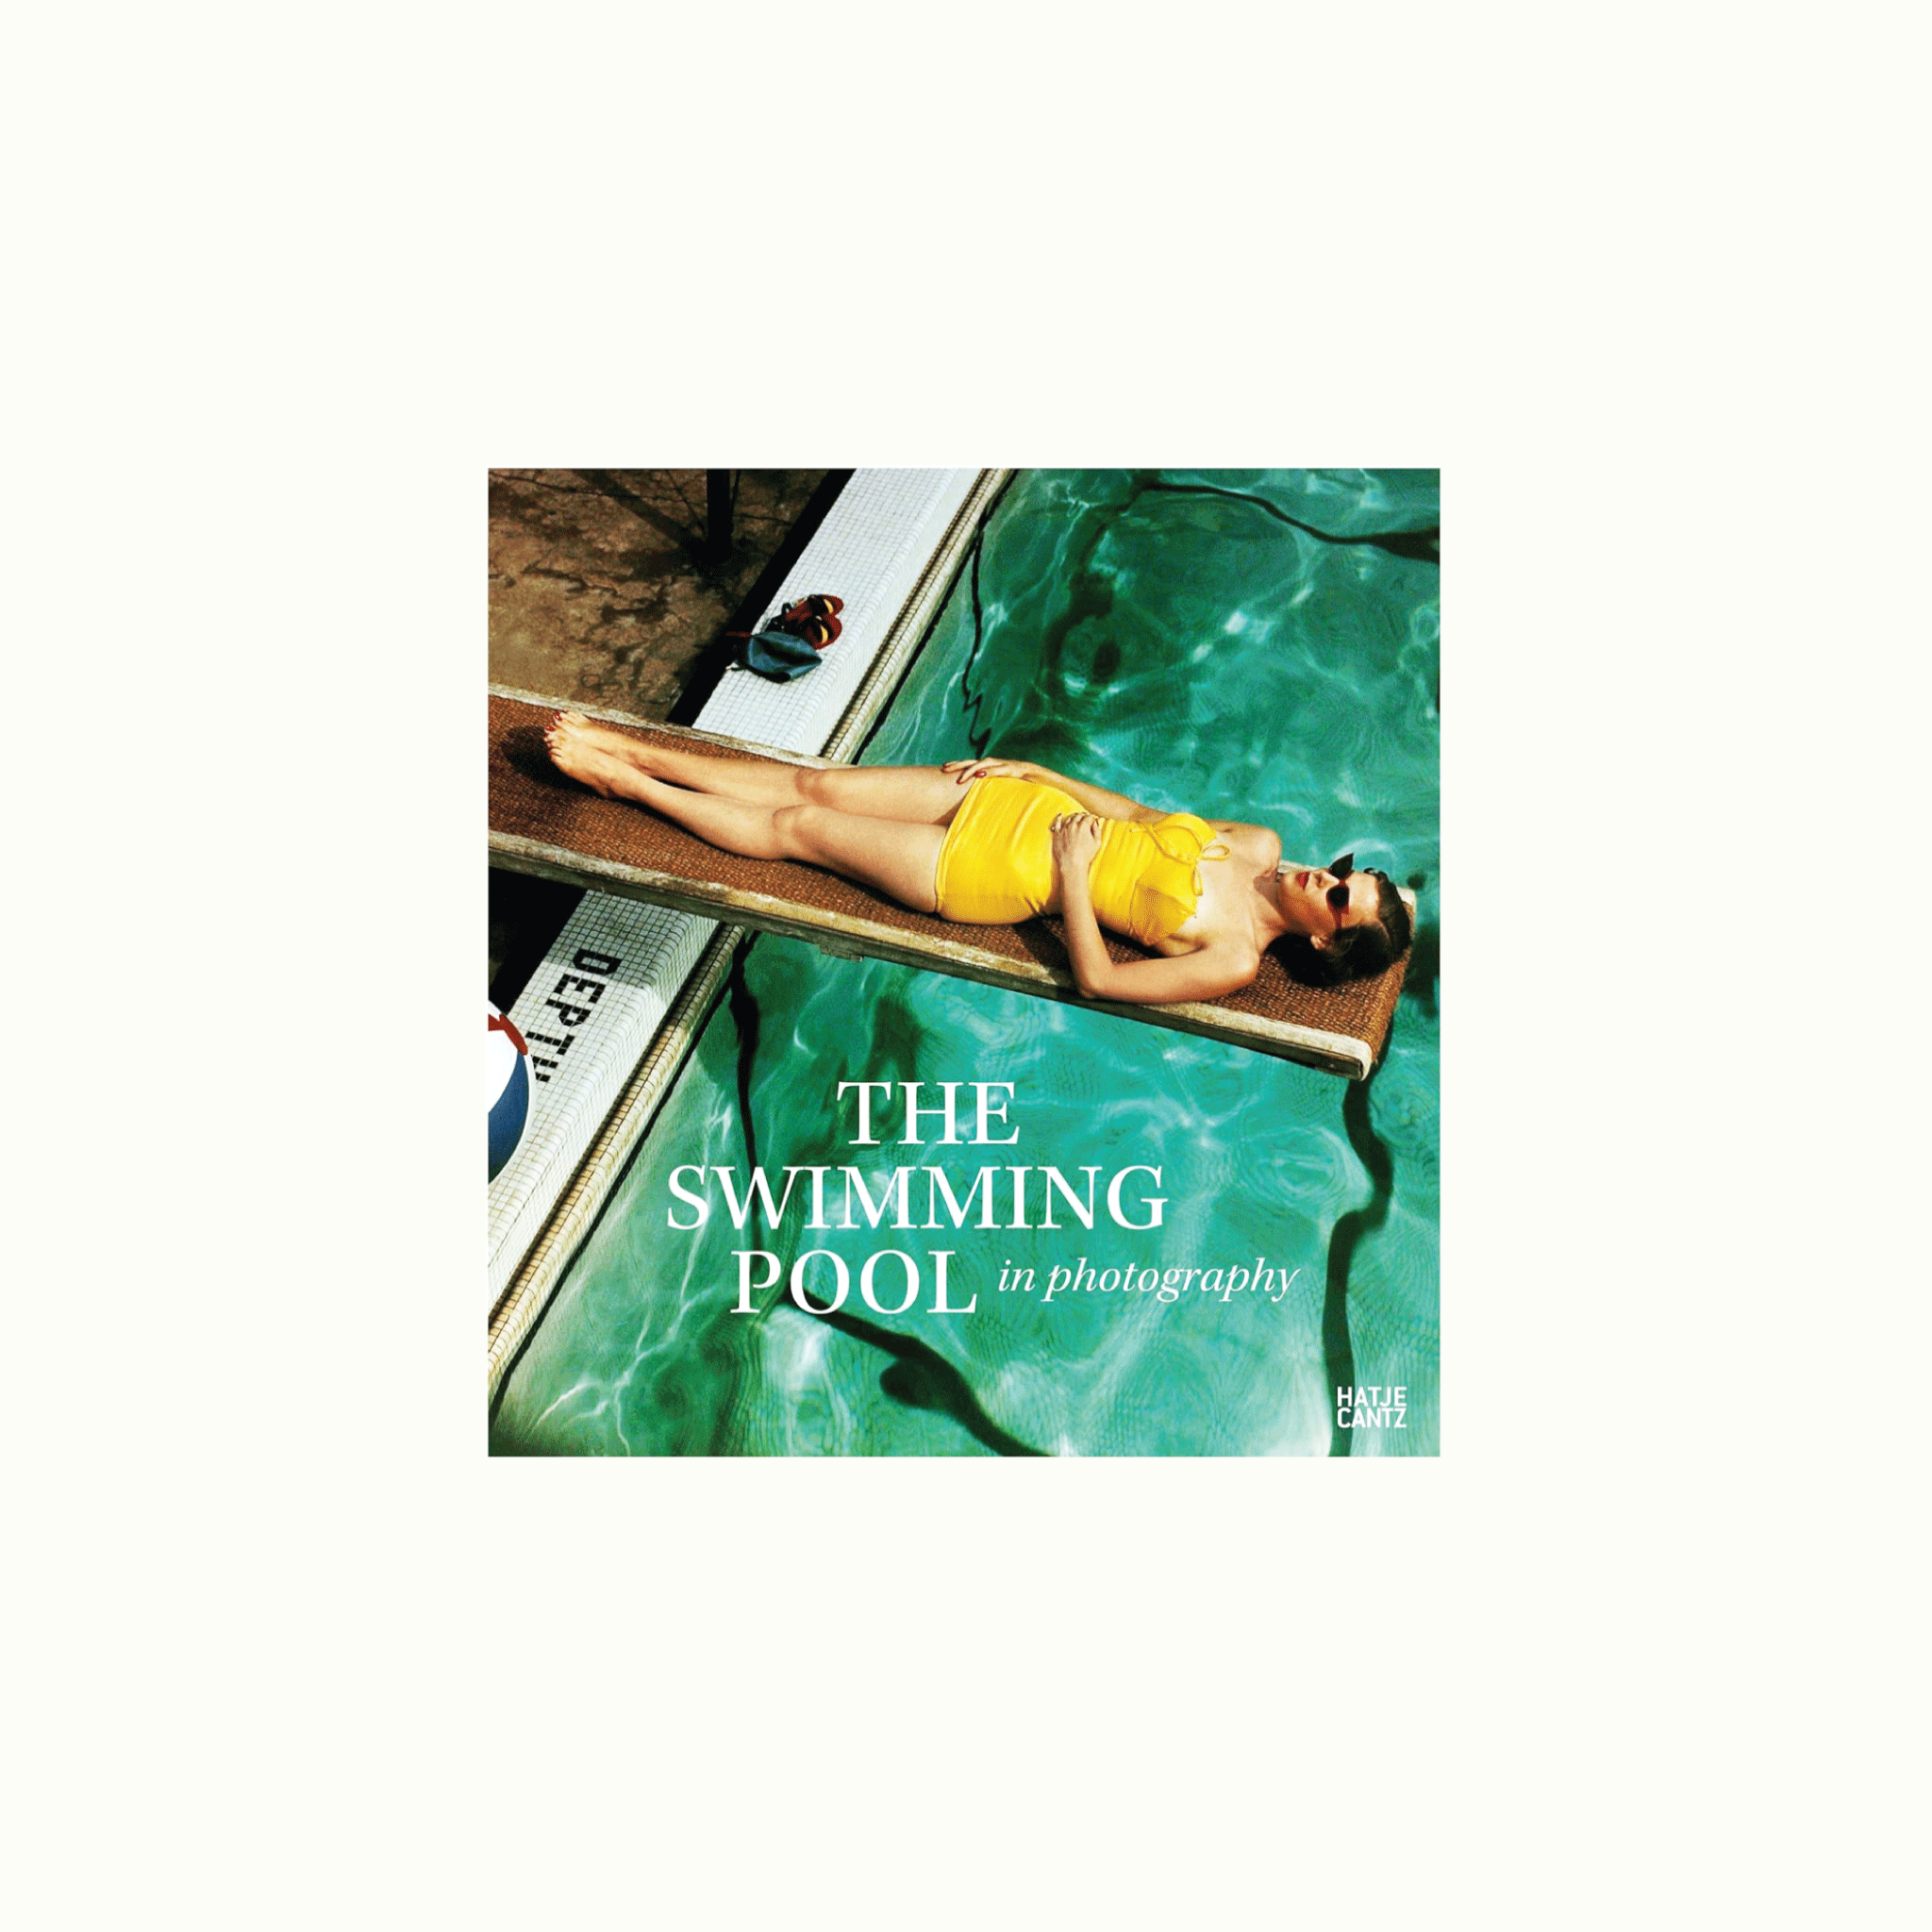 The Swimming Pool in Photography Collection Book for Skyview Los Alamos by Nomada Deco